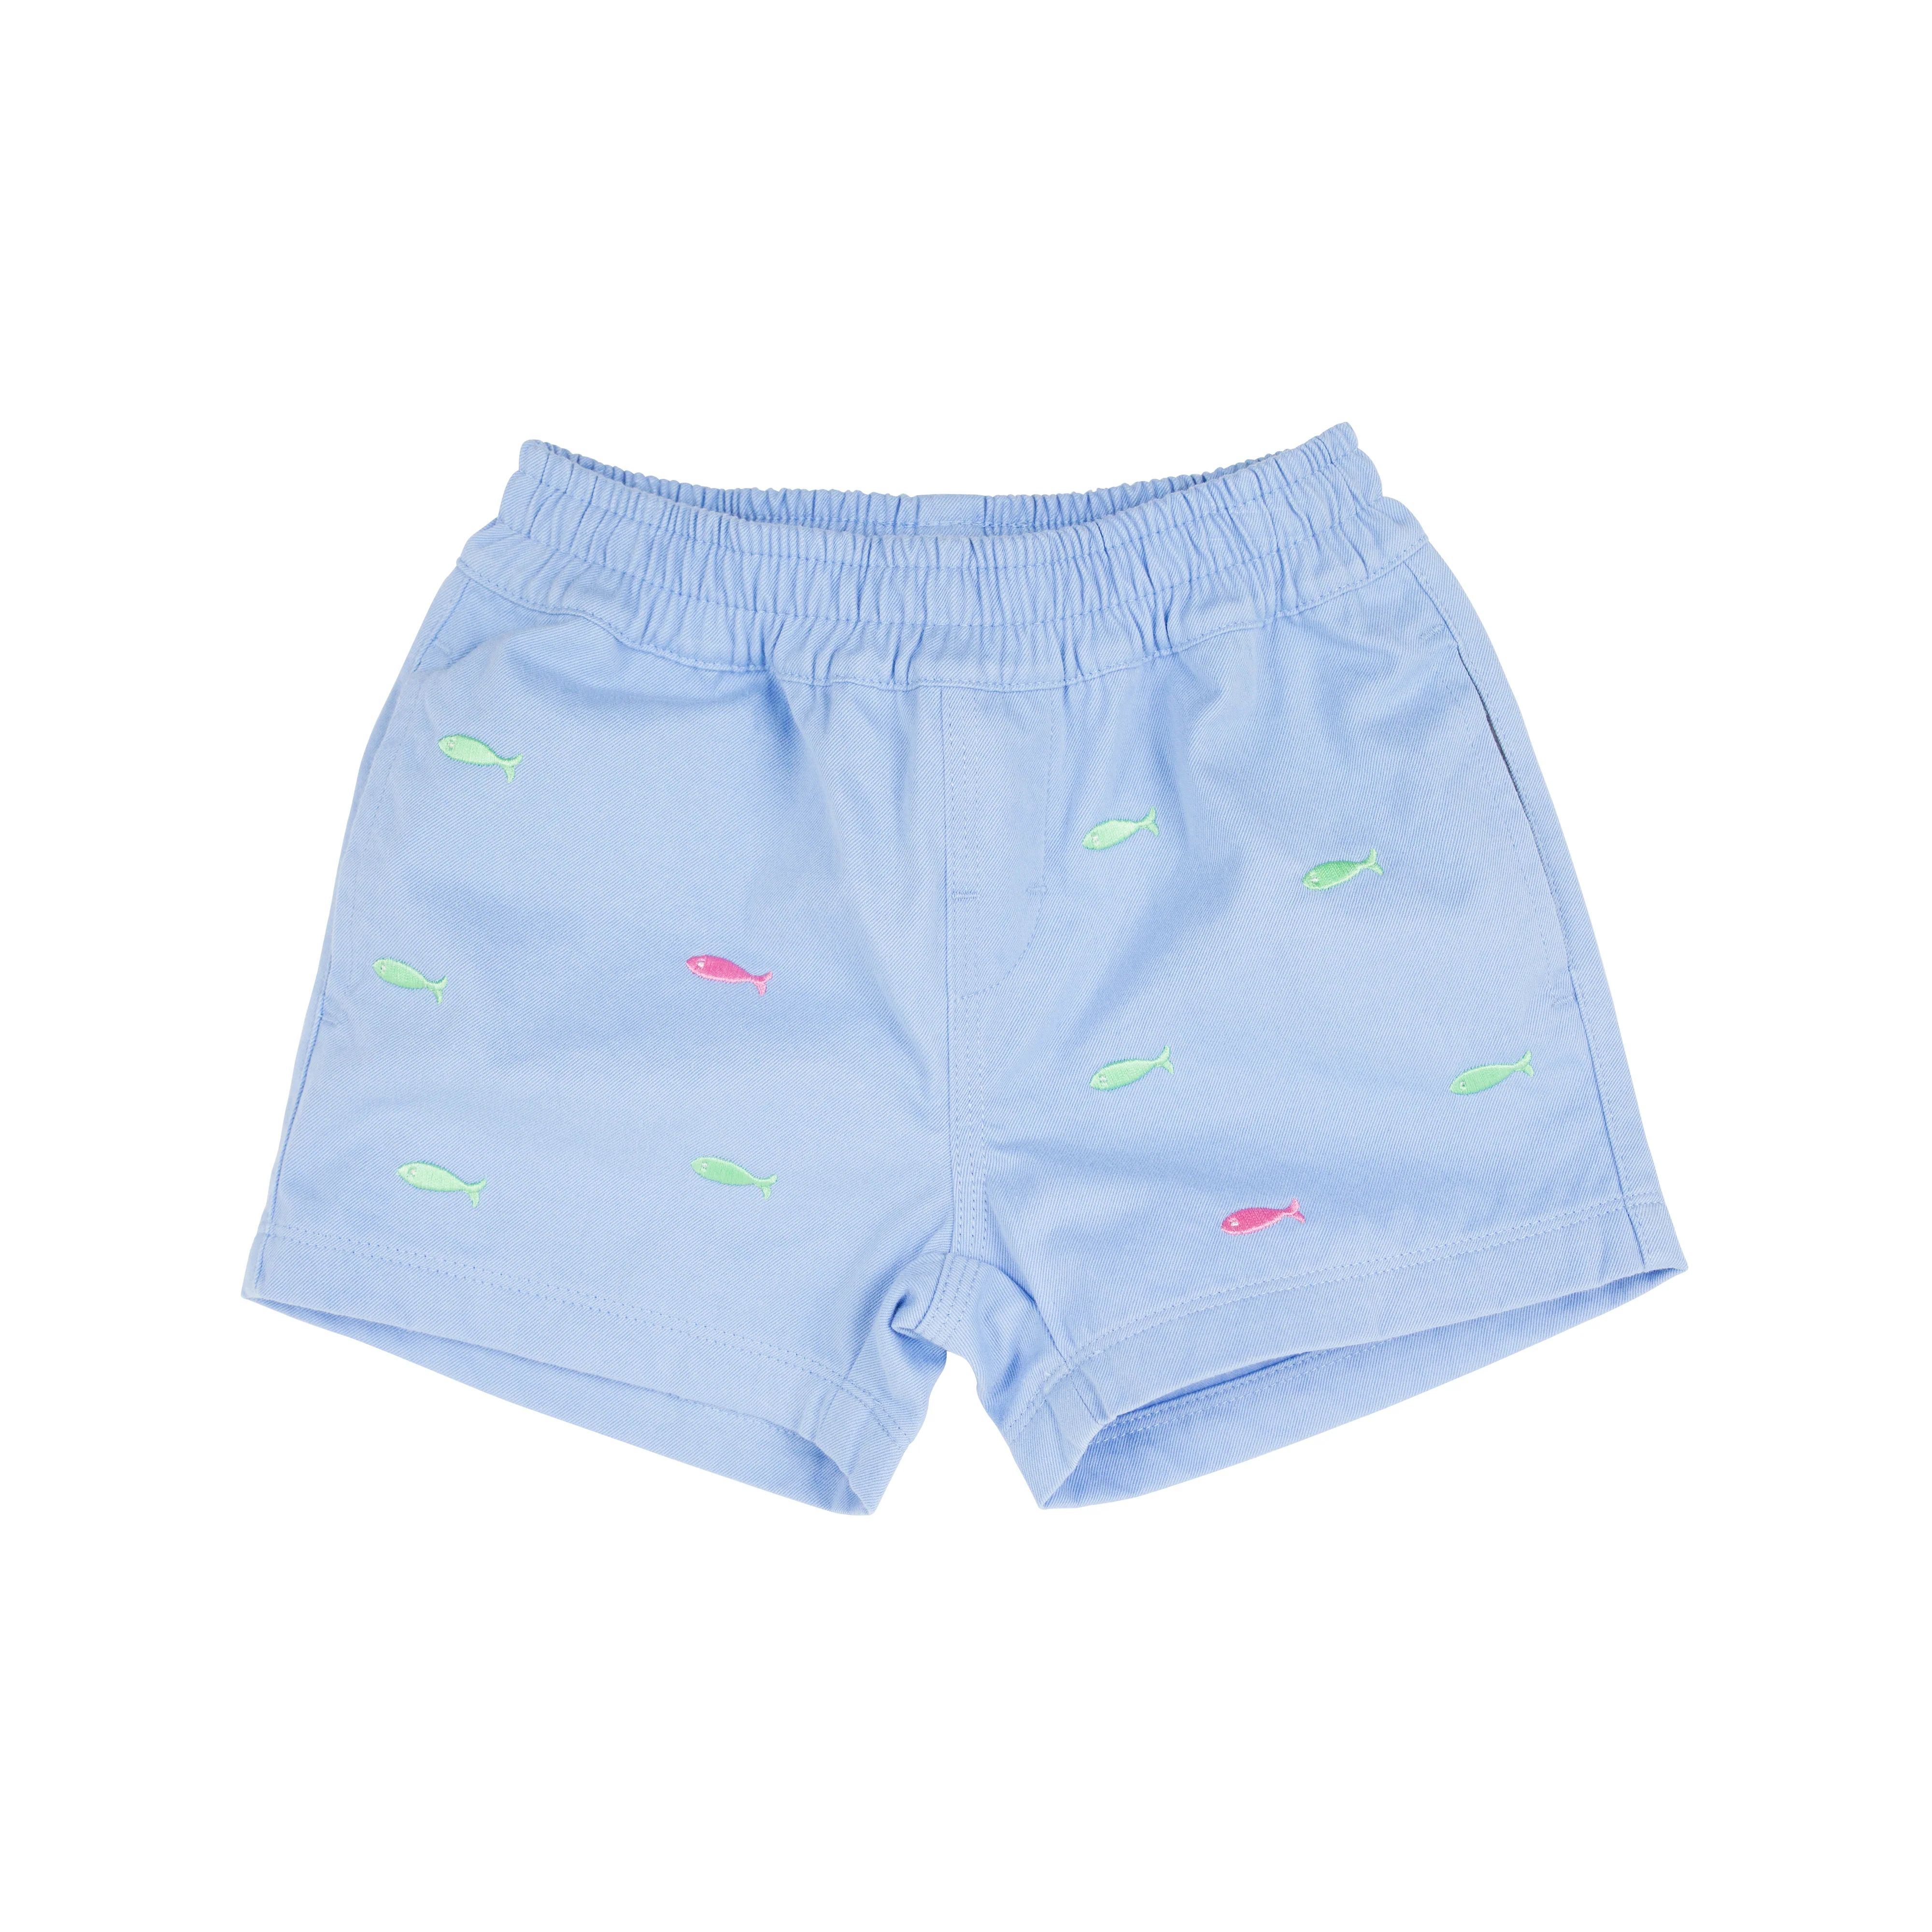 Critter Sheffield Shorts - Beale Street Blue with Fish Embroidery | The Beaufort Bonnet Company